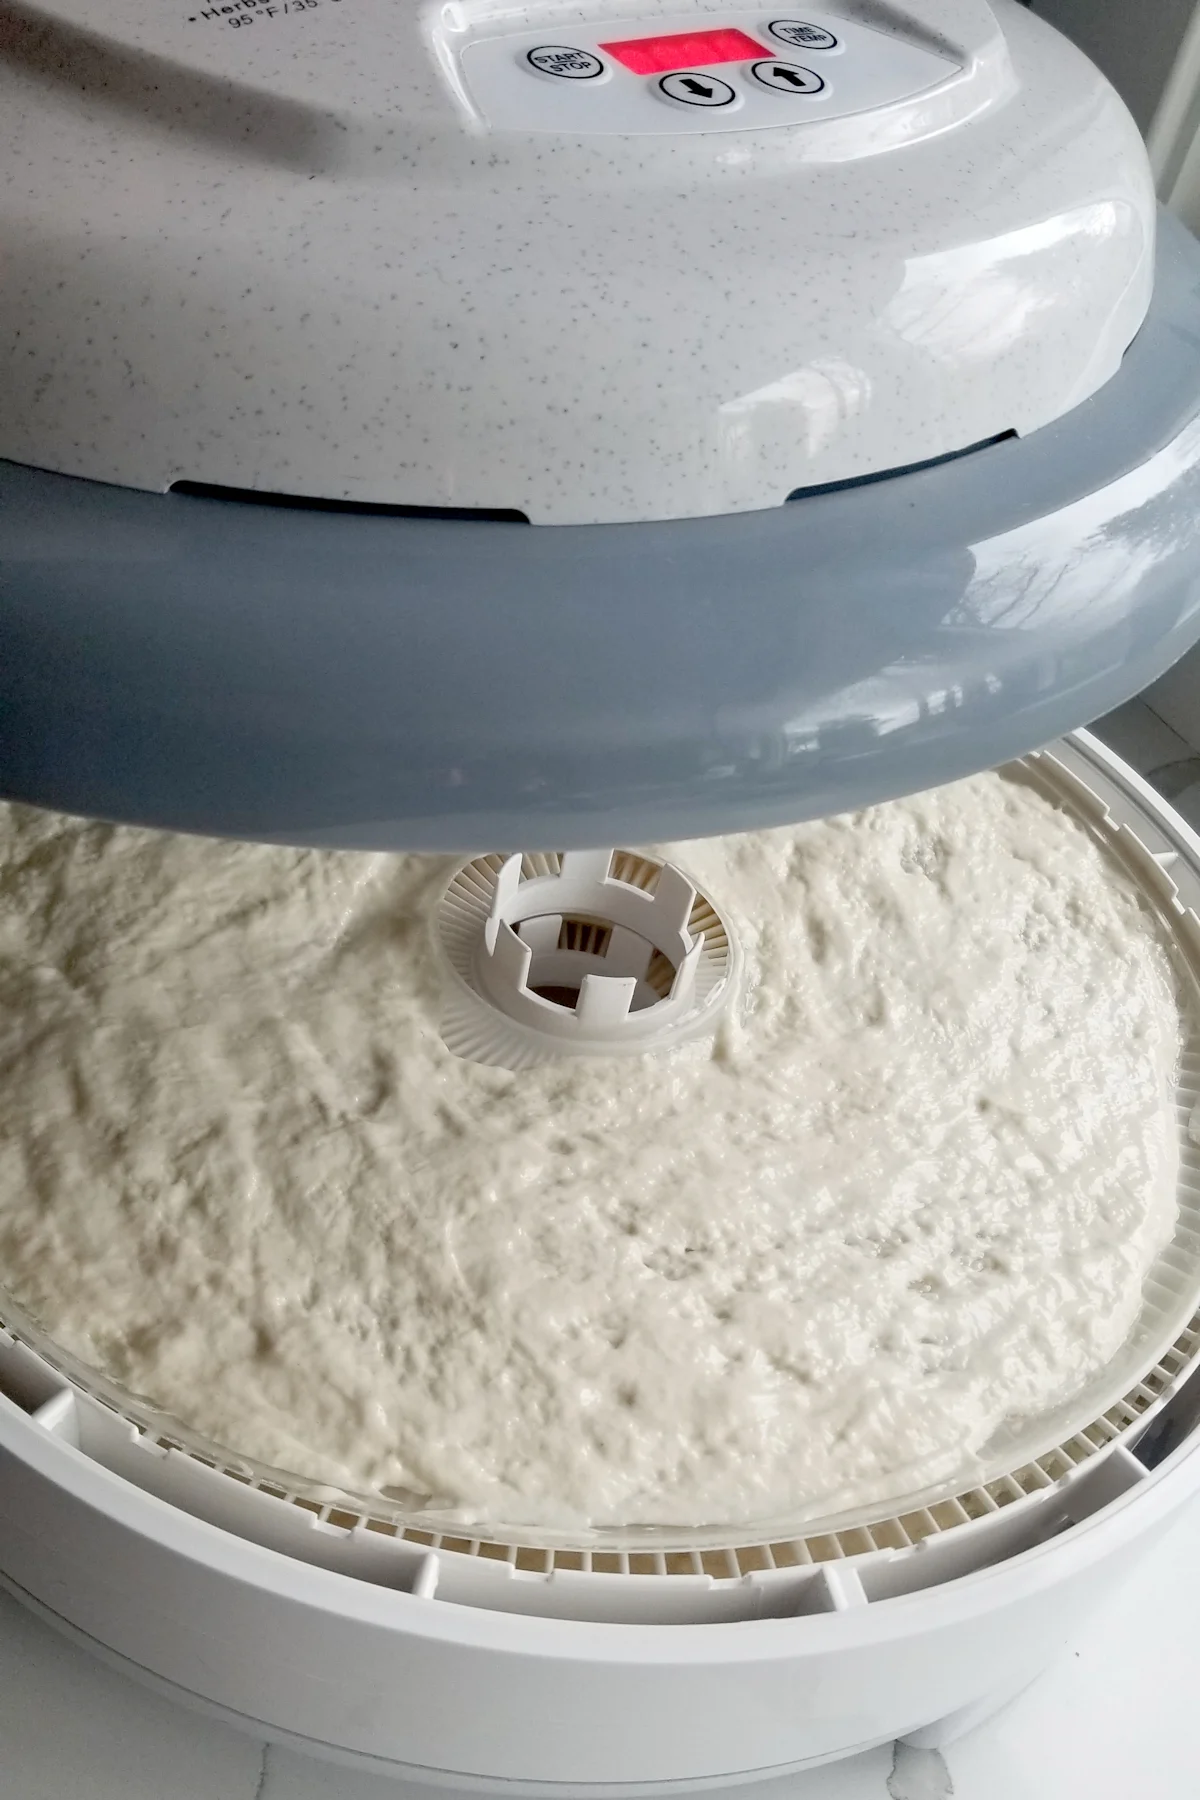 show a food dehydrator with a tray of sourdough starter inside